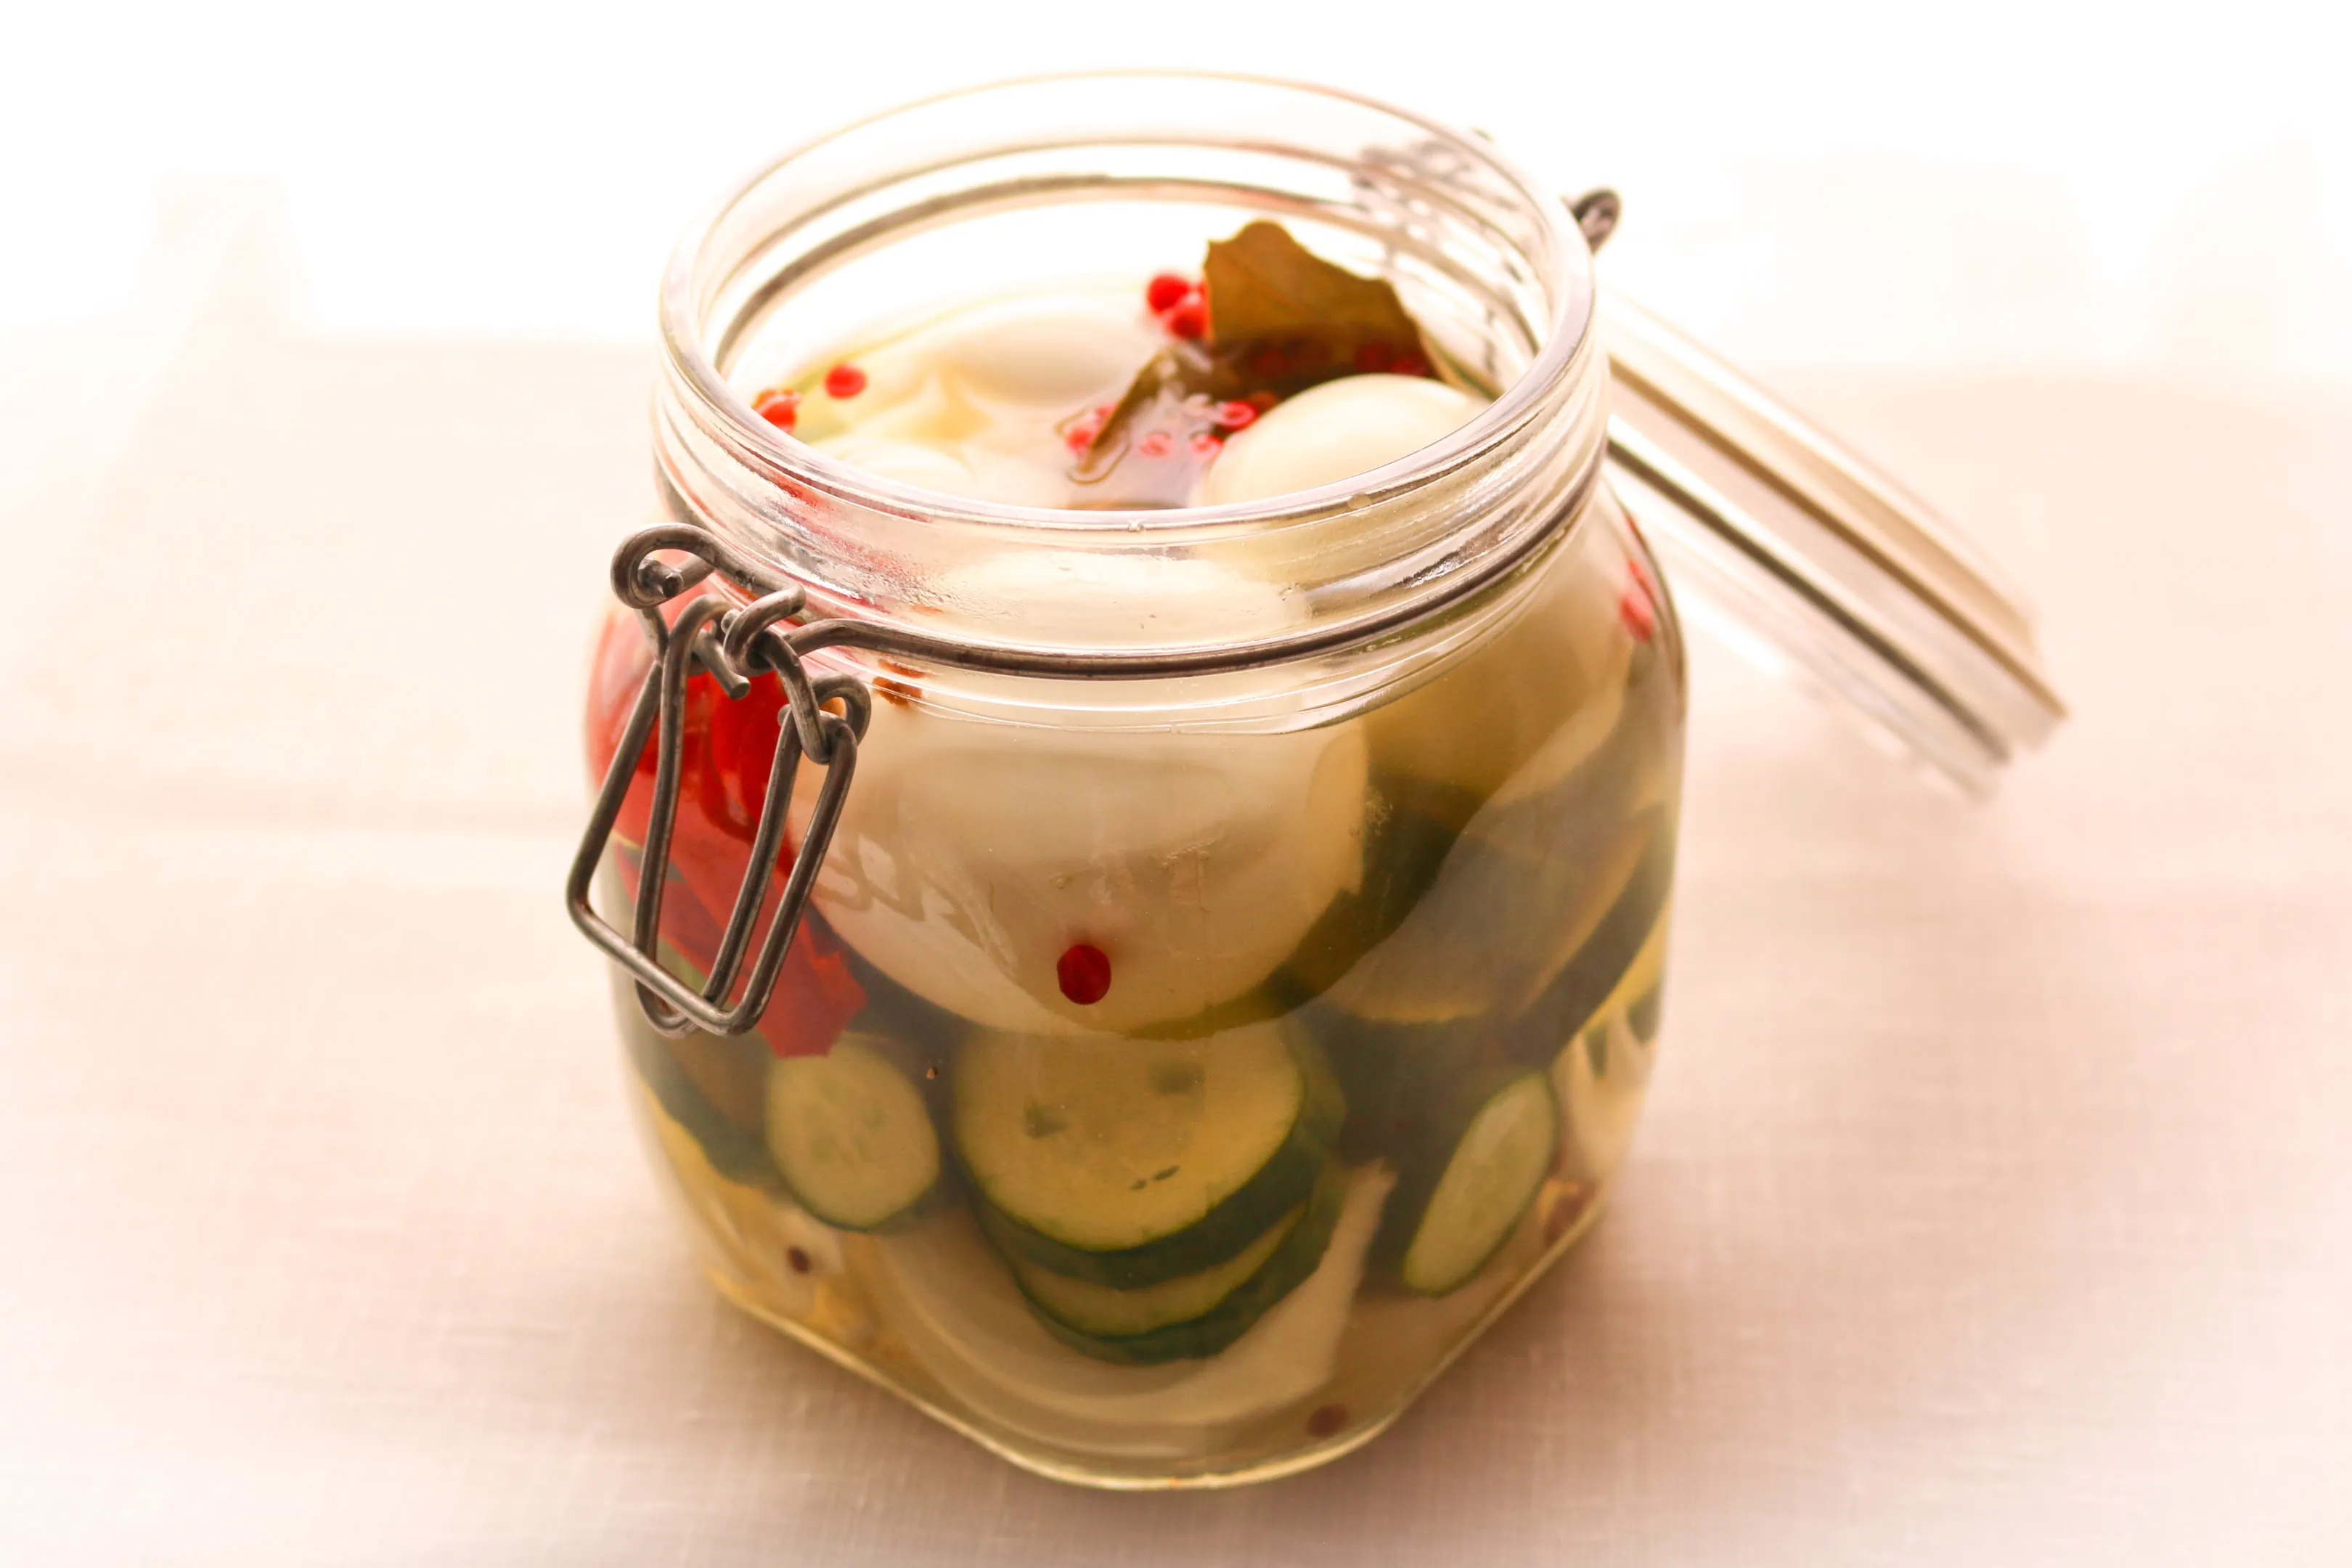 Healthy old-fashioned pickled eggs